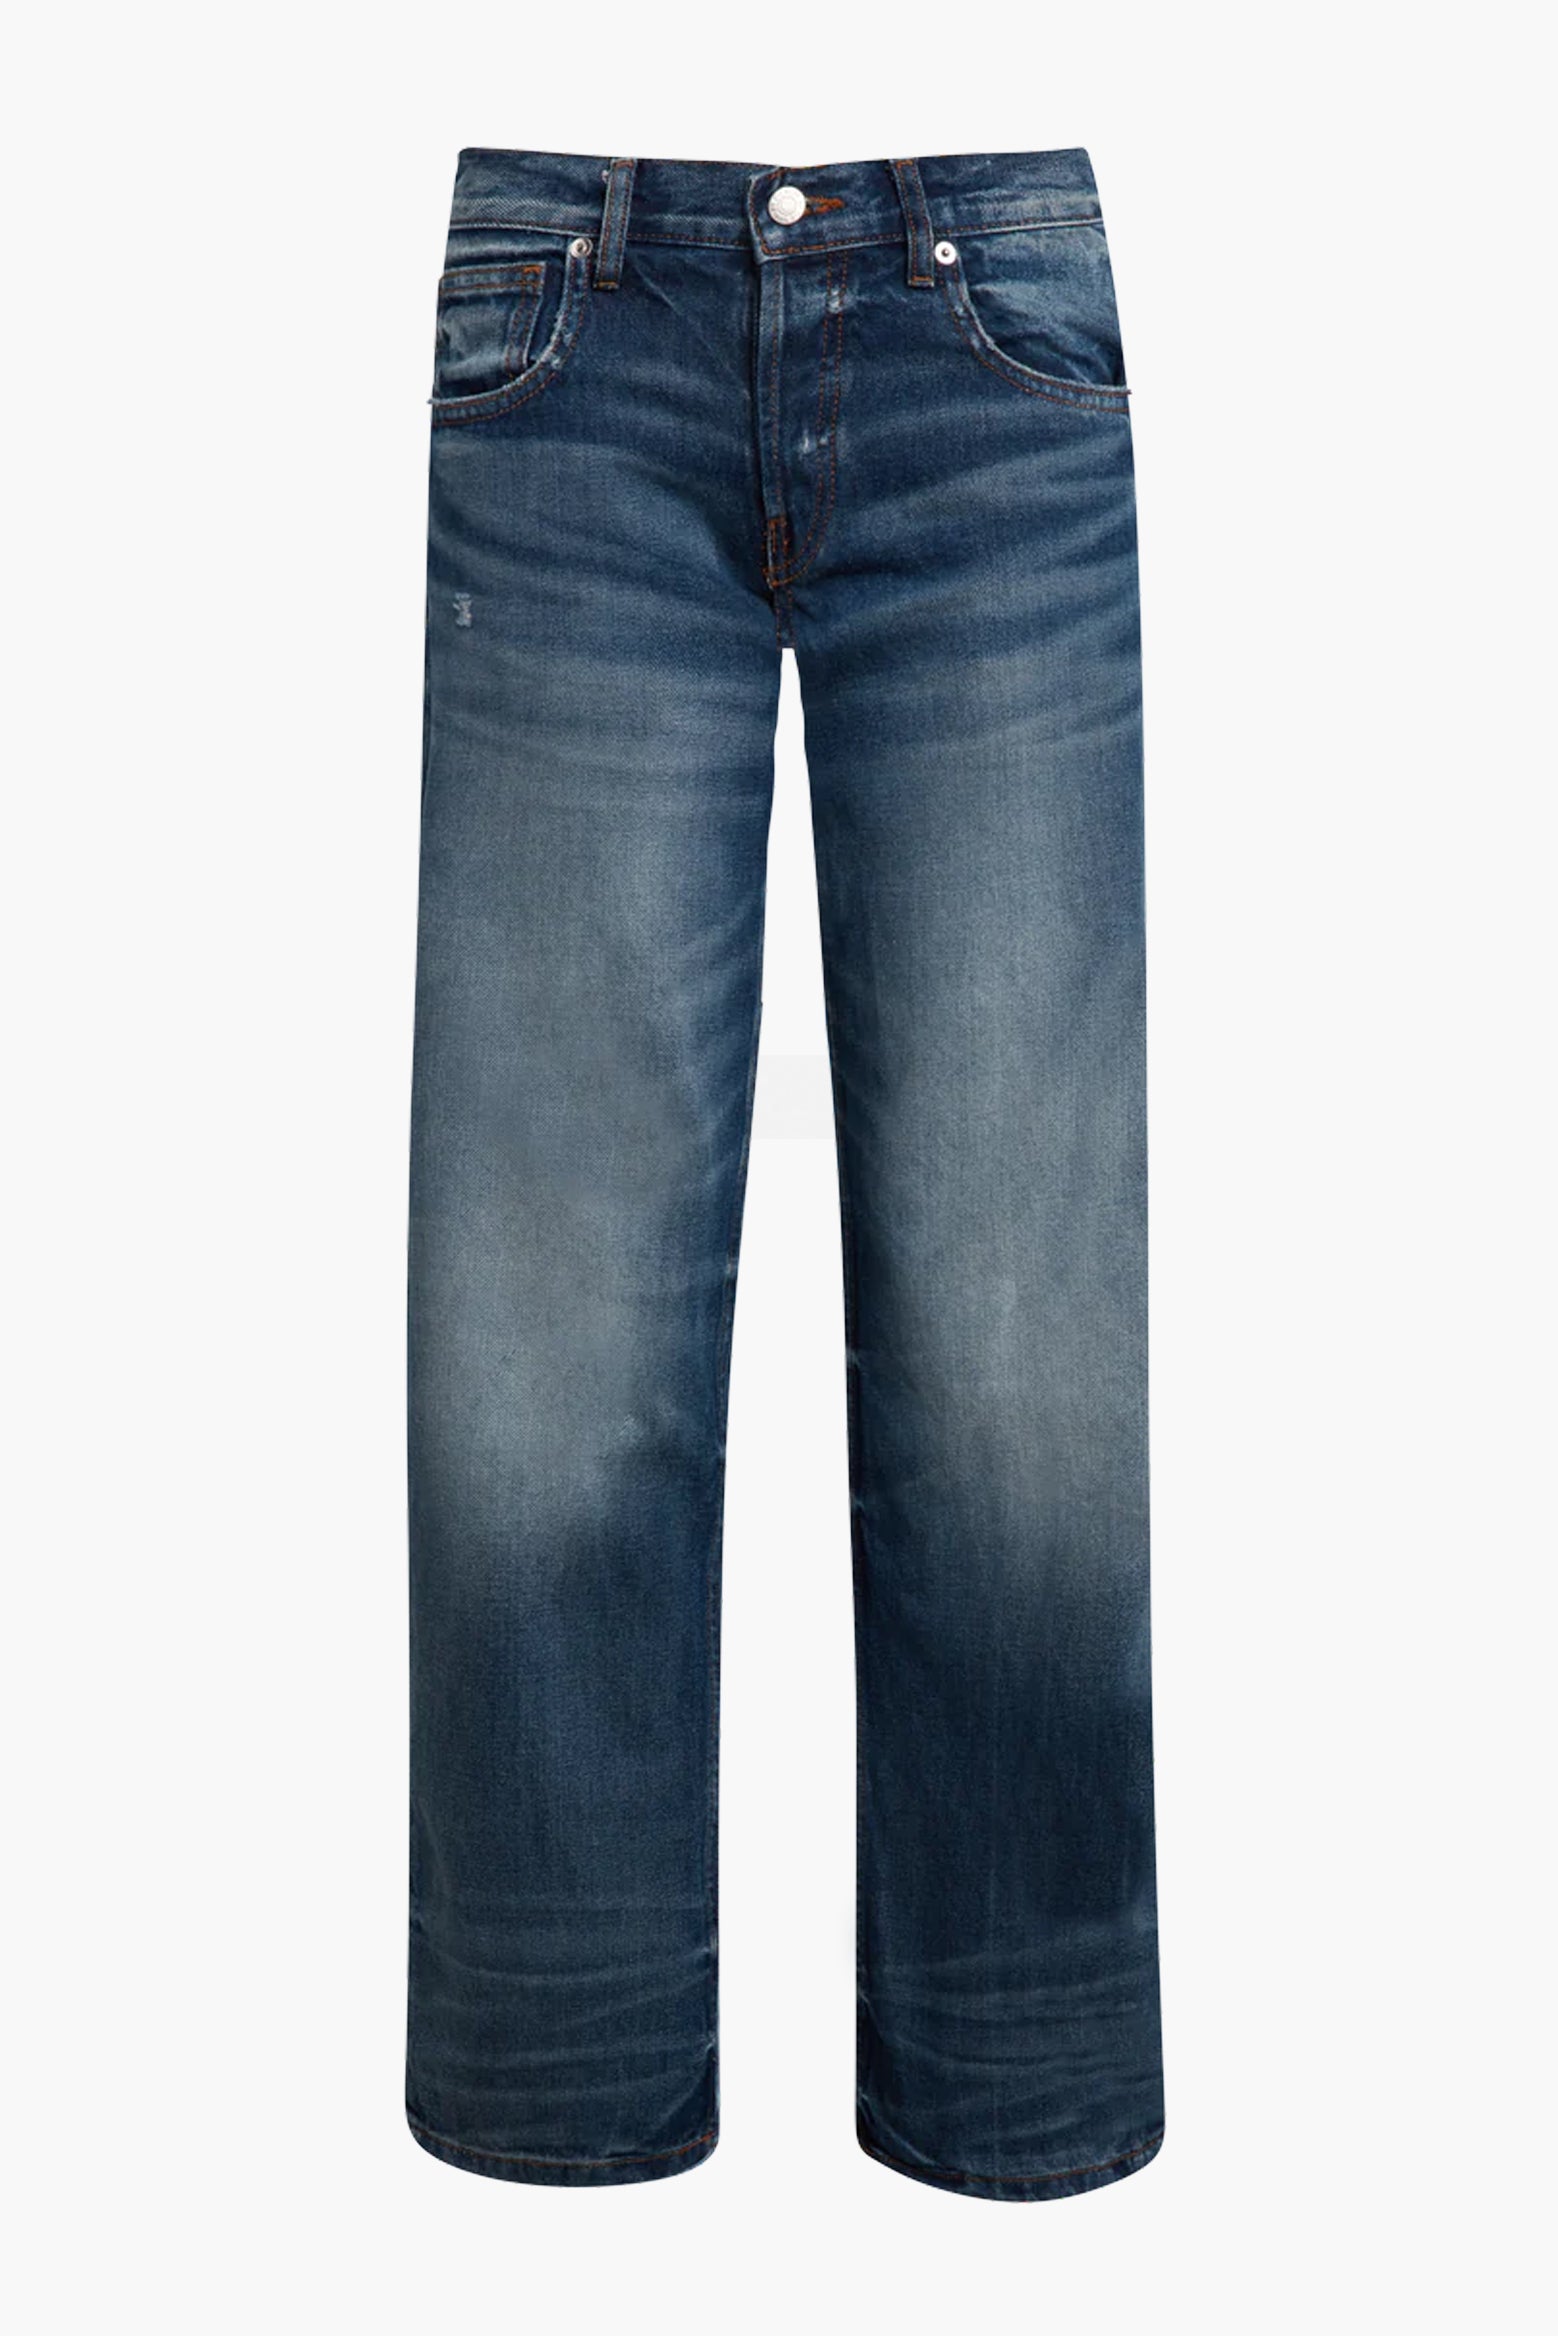 EB Denim Low Rise Baggy Jean in Tommy available at The New Trend Australia. 